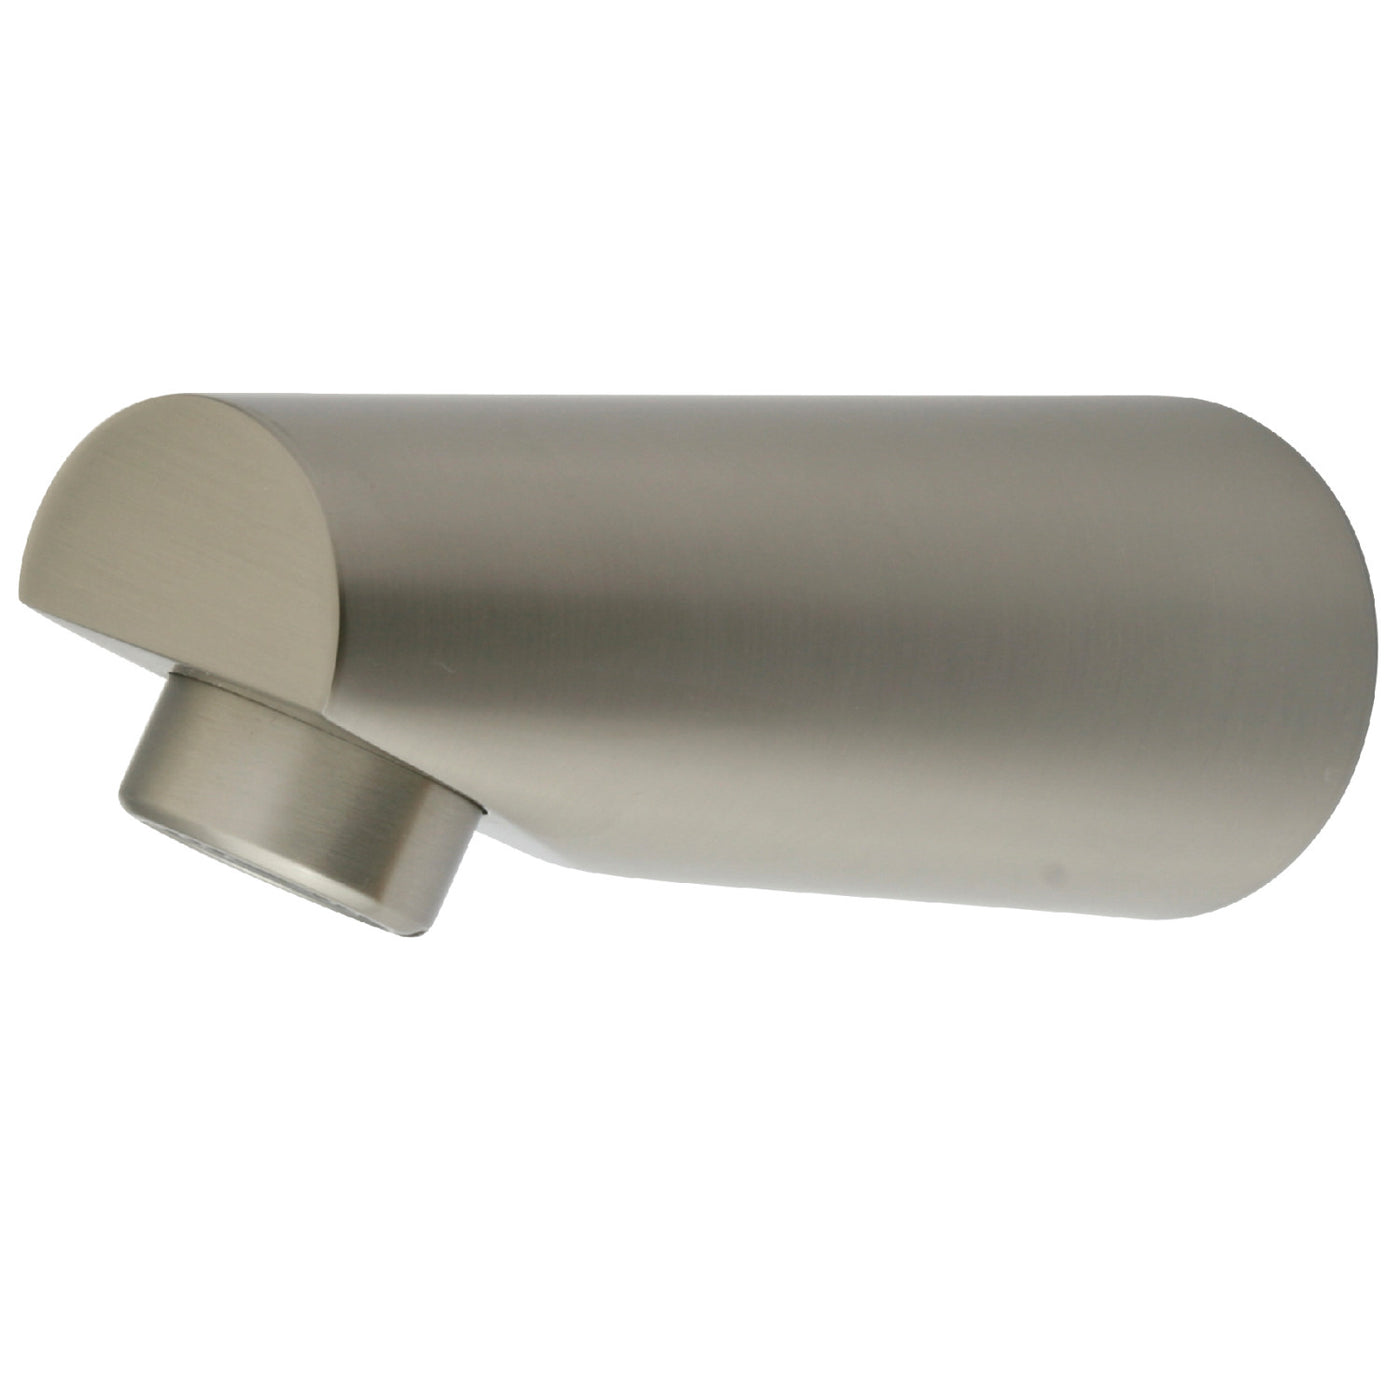 Elements of Design DK6187A8 Tub Faucet Spout, Brushed Nickel